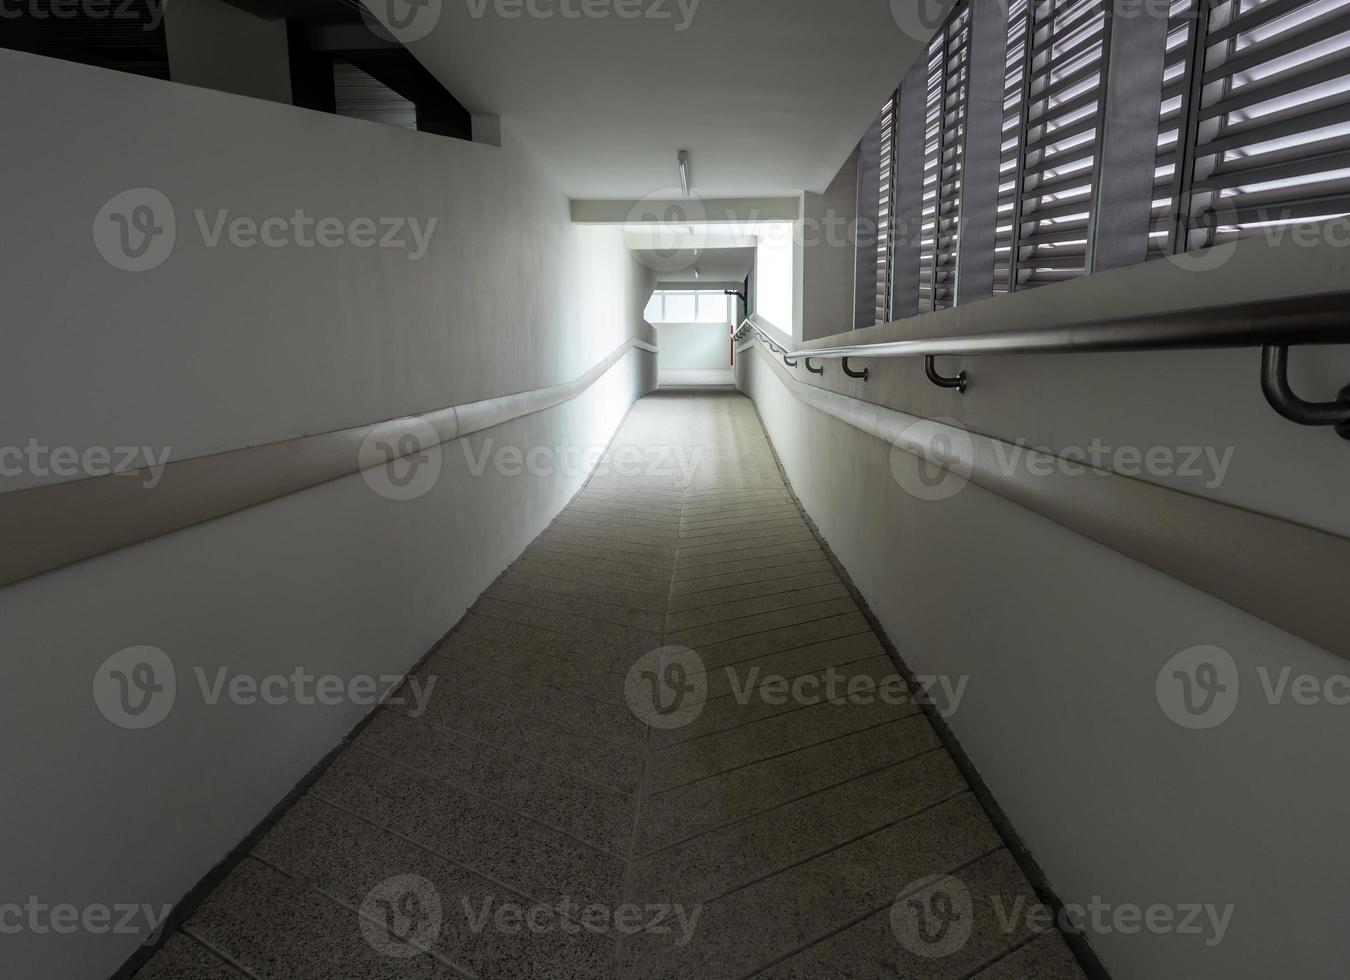 Light at the exit of the corridor in the building photo